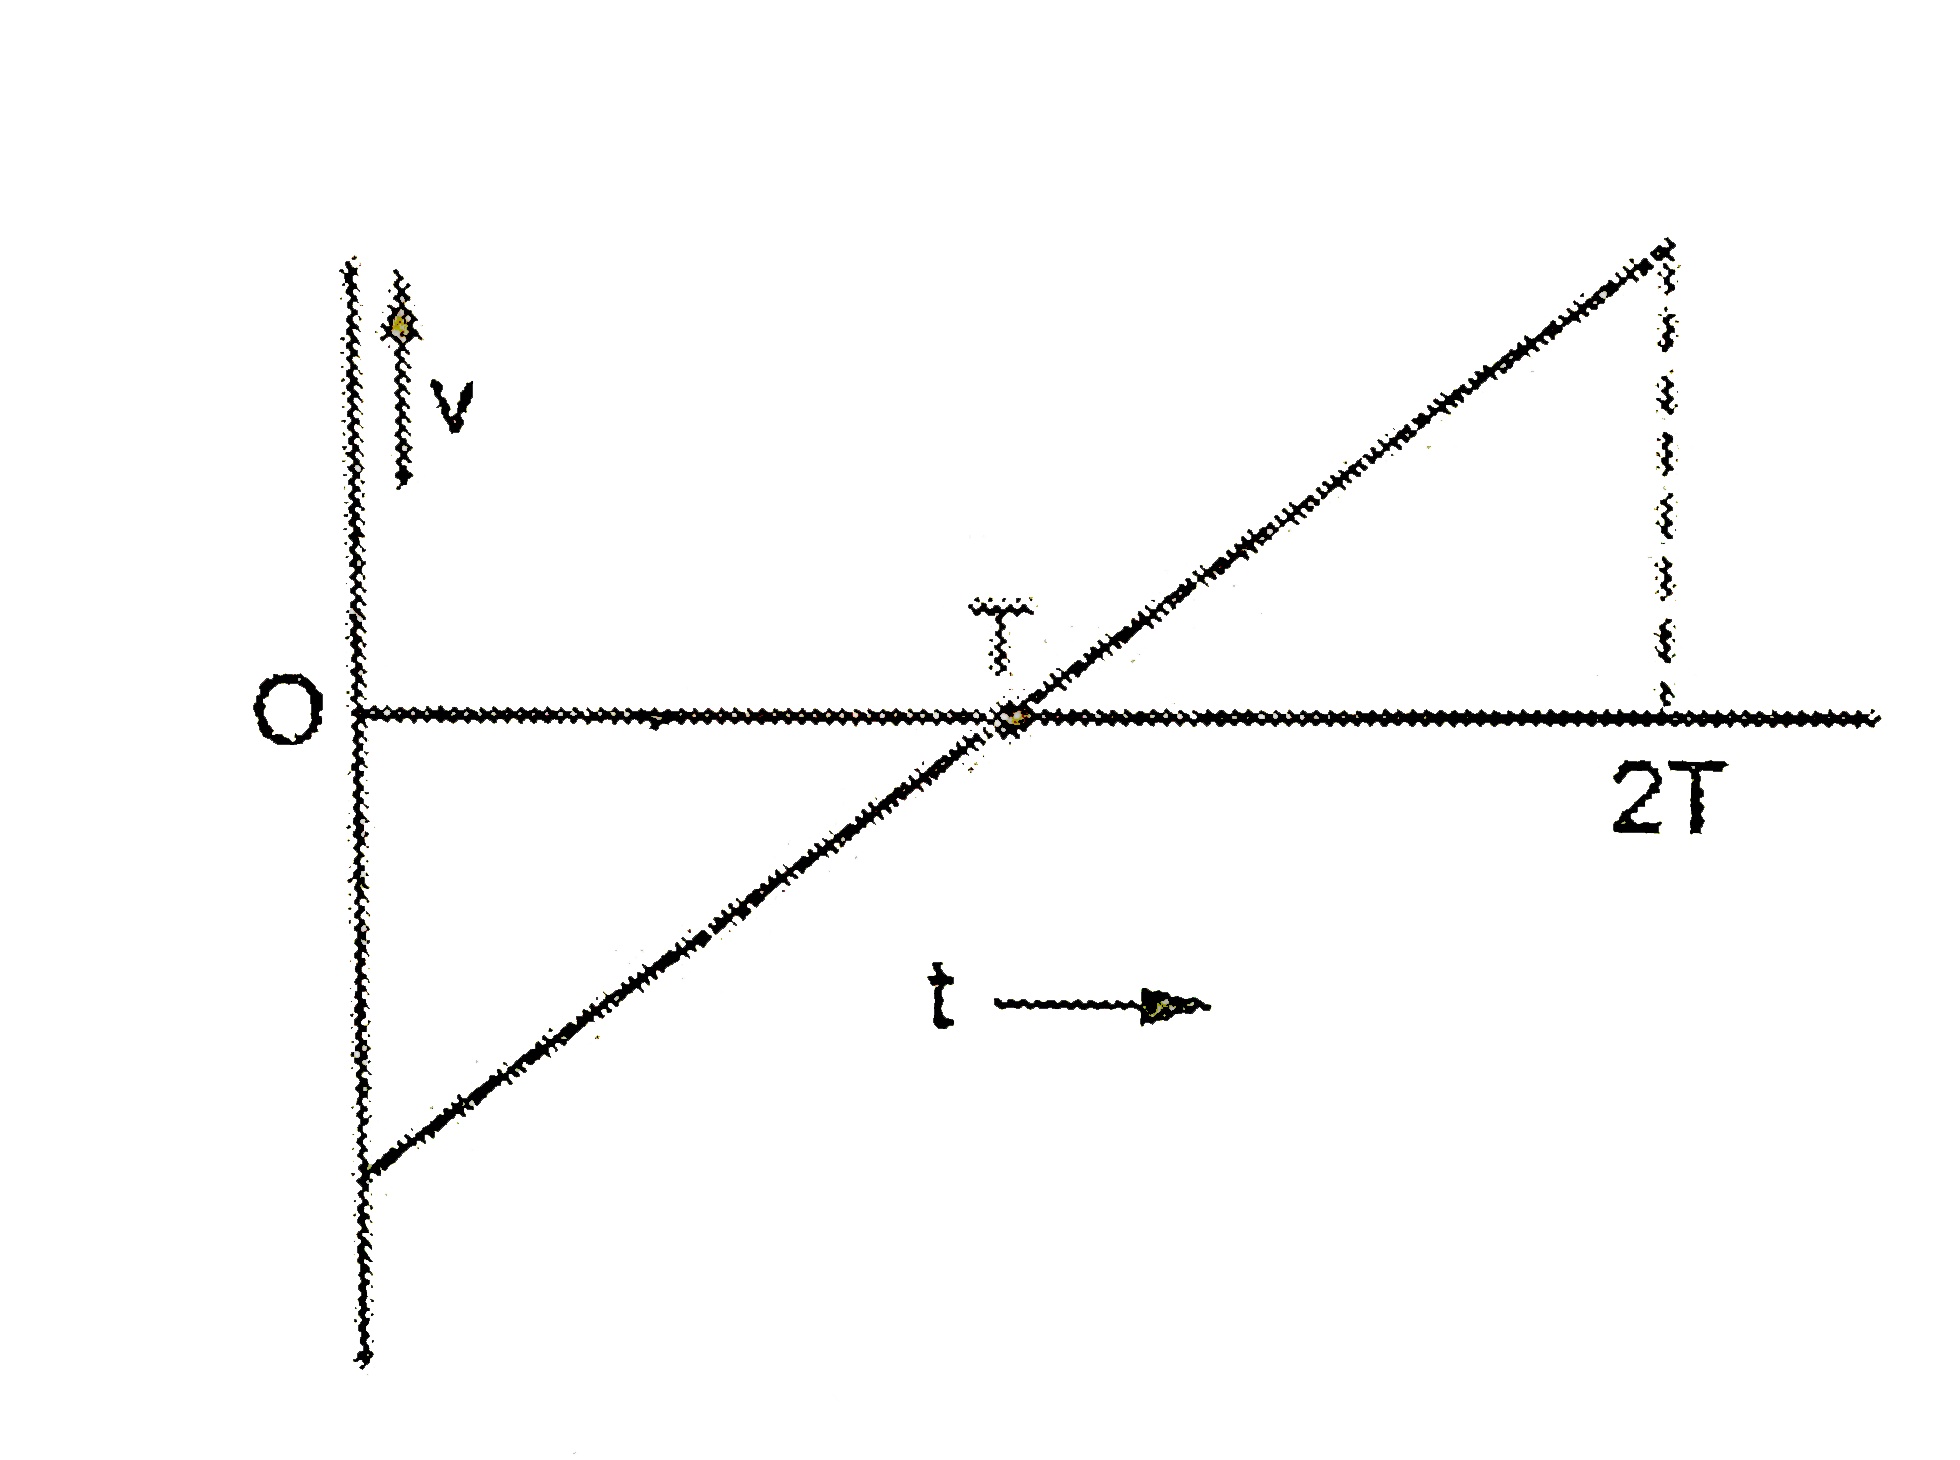 The figure shows the velocity (v) of a particle ploted against time (t).